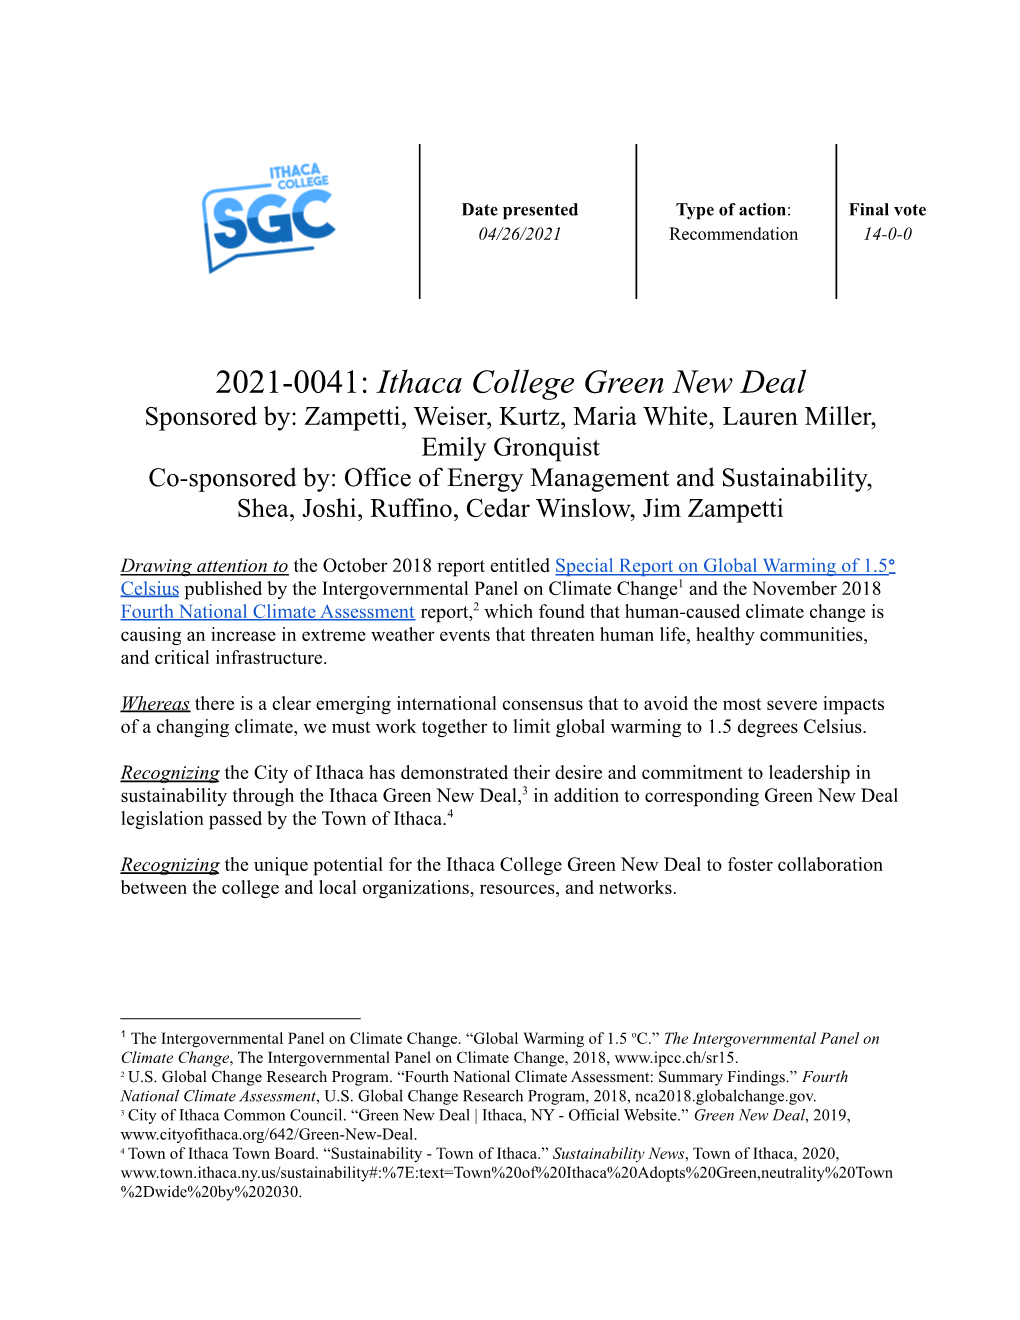 2021-0041: Ithaca College Green New Deal